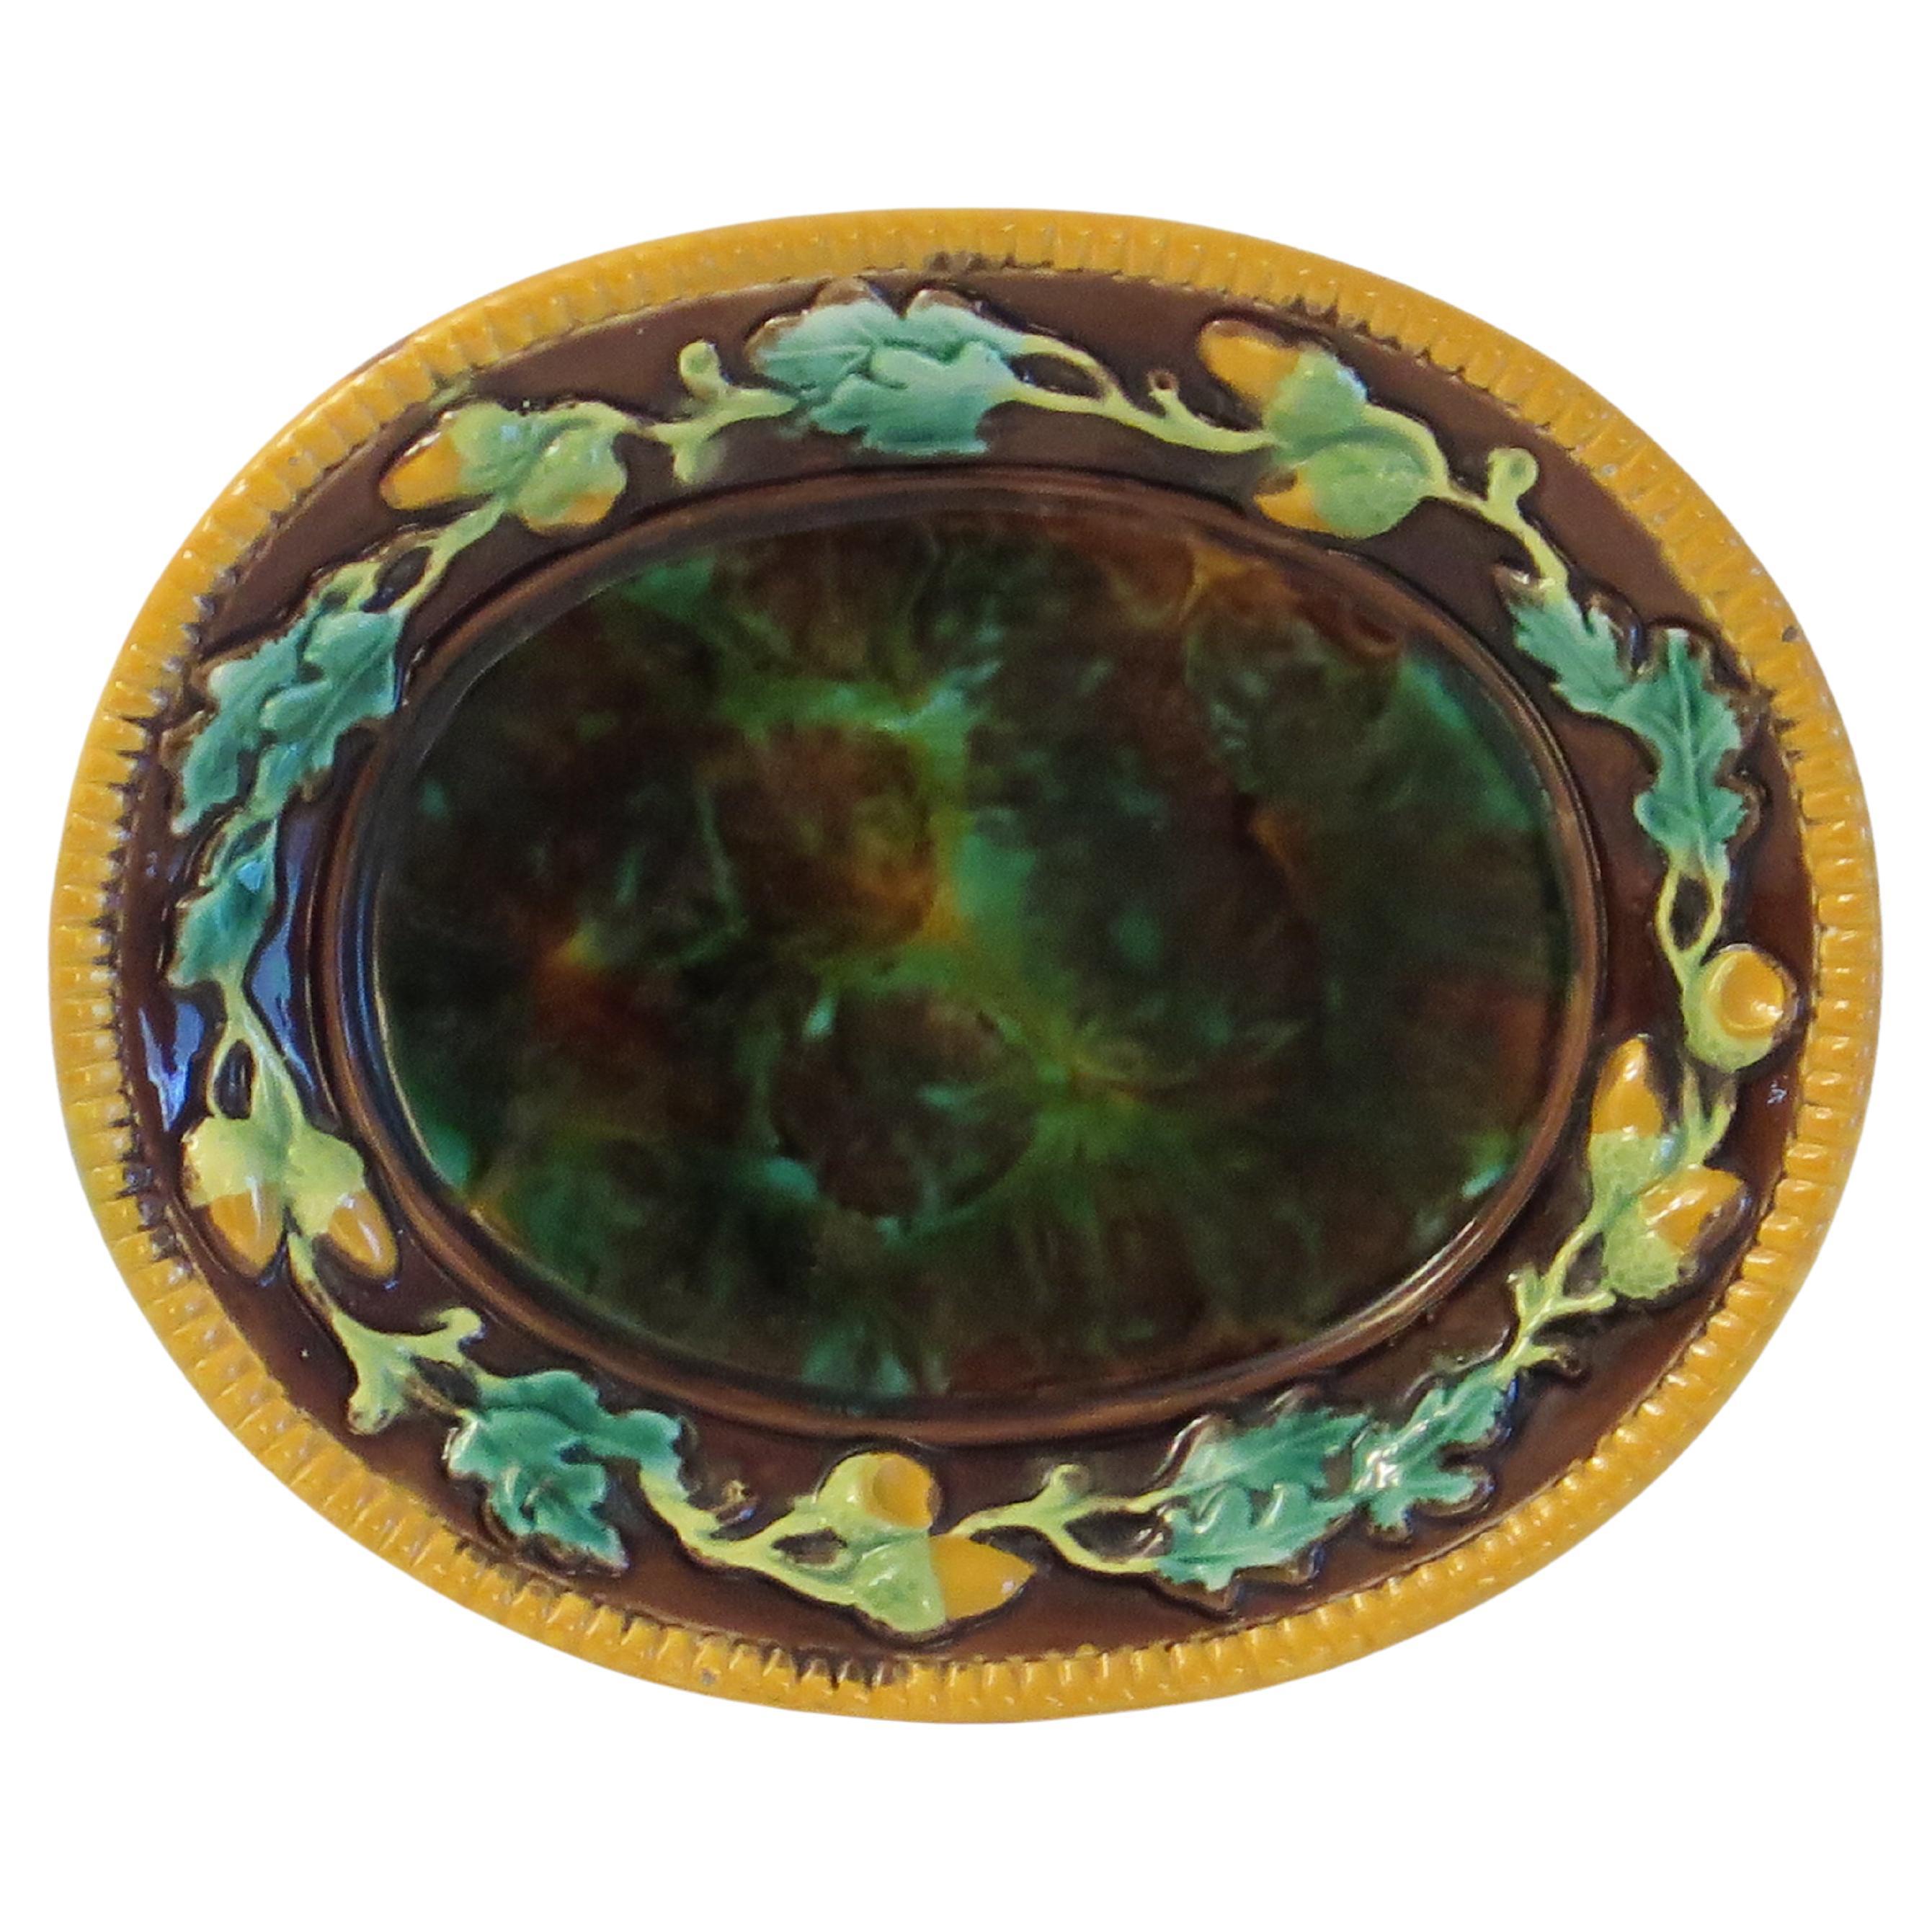 George Jones Majolica Oval Dish or Platter fully marked, Circa 1868